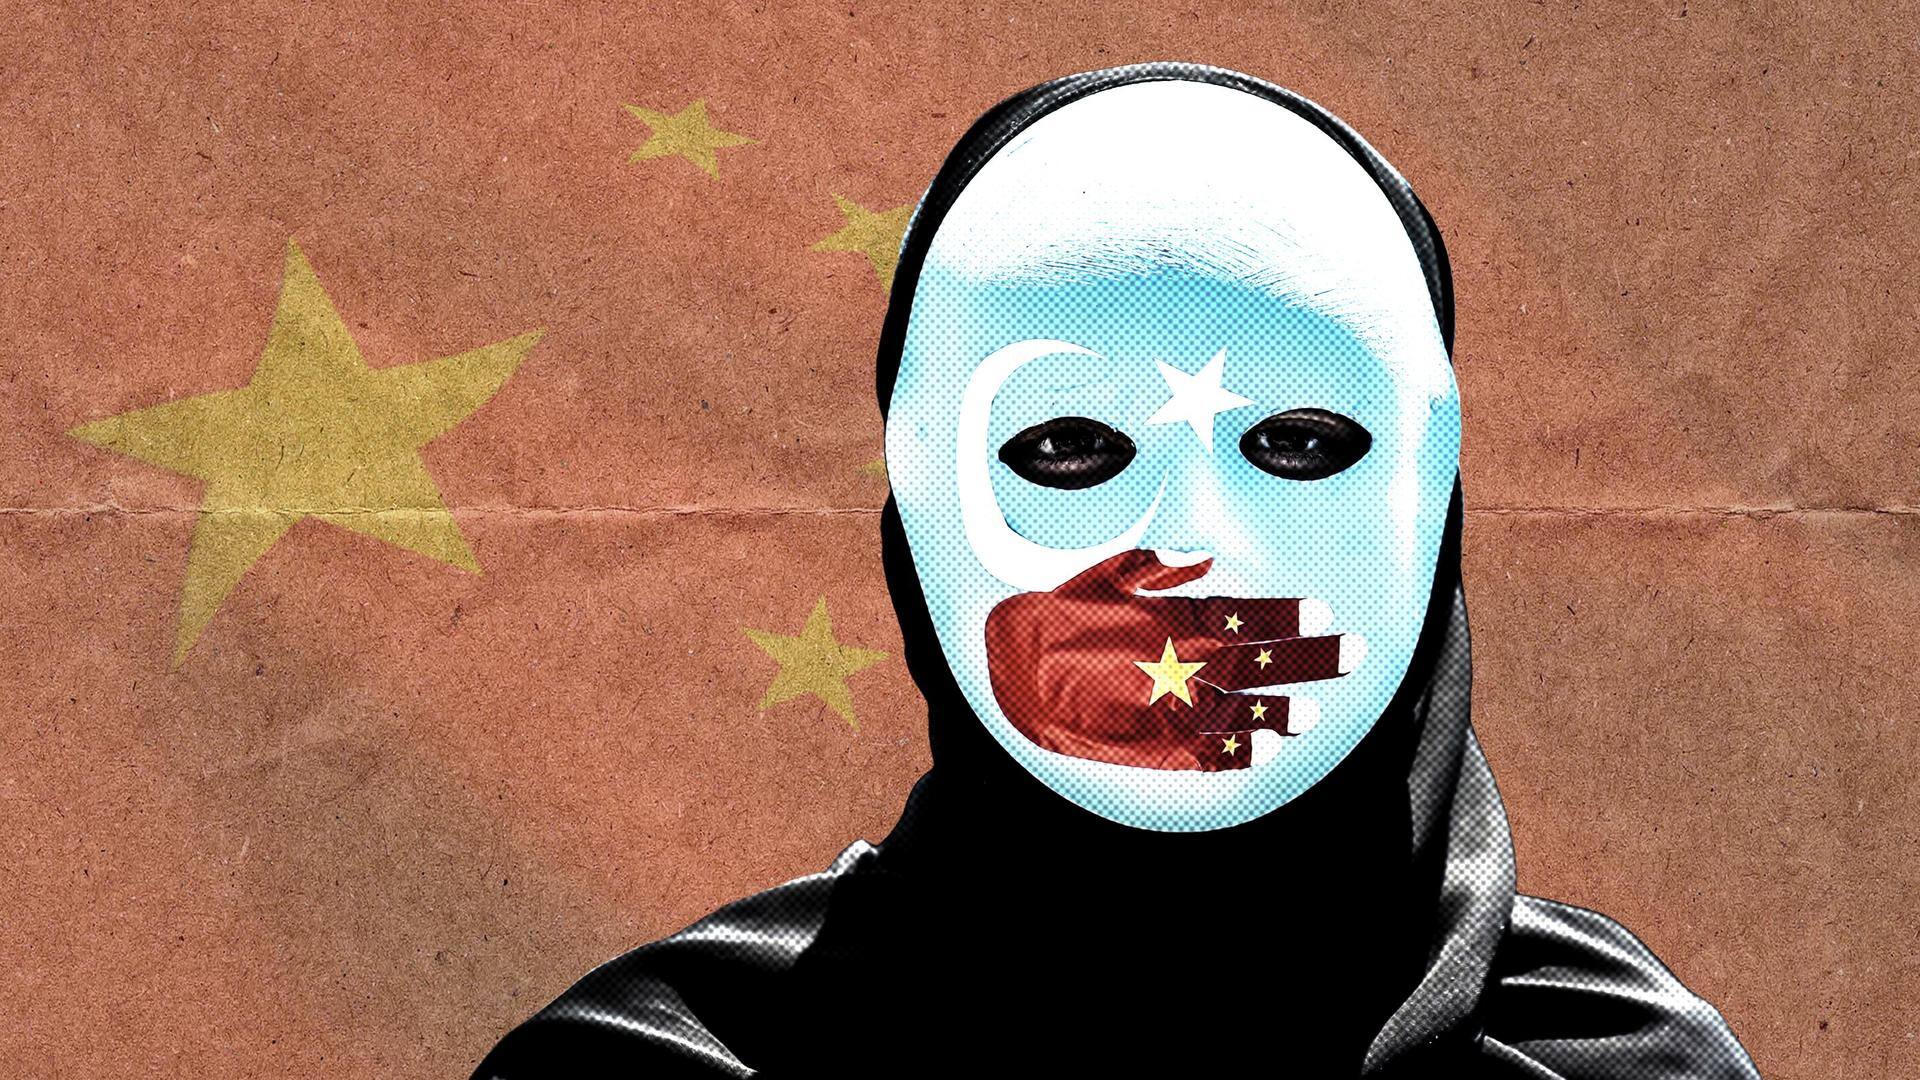 Why is China reportedly using spies on Uyghur Muslims